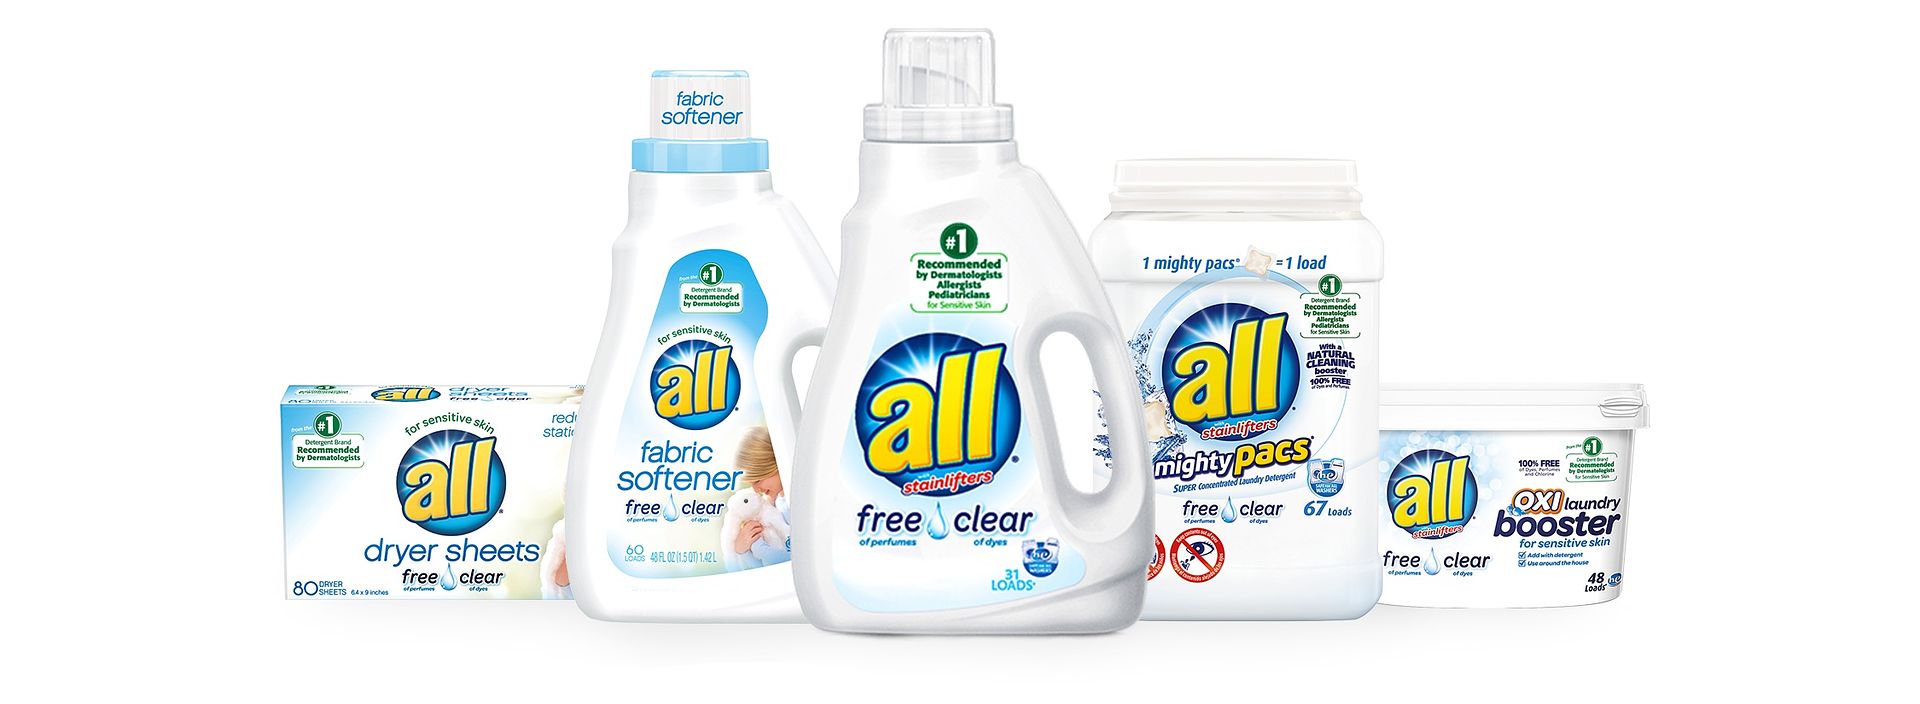 all free clear laundry products make you #freetobe as messy as you'd like